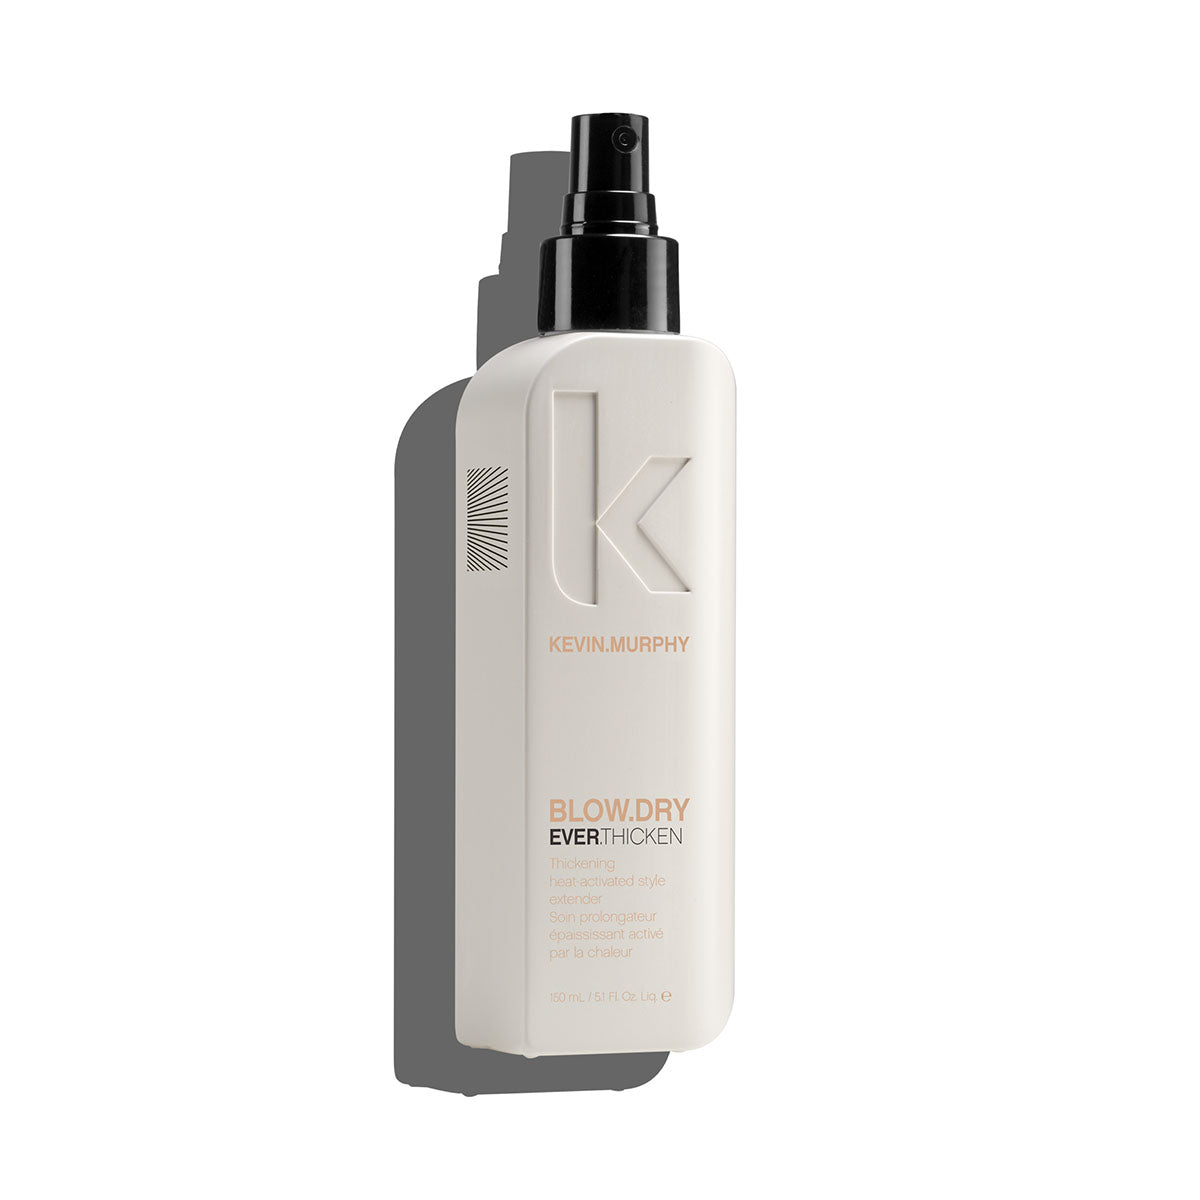 KEVIN.MURPHY Blow Dry Ever Thicken 150ml